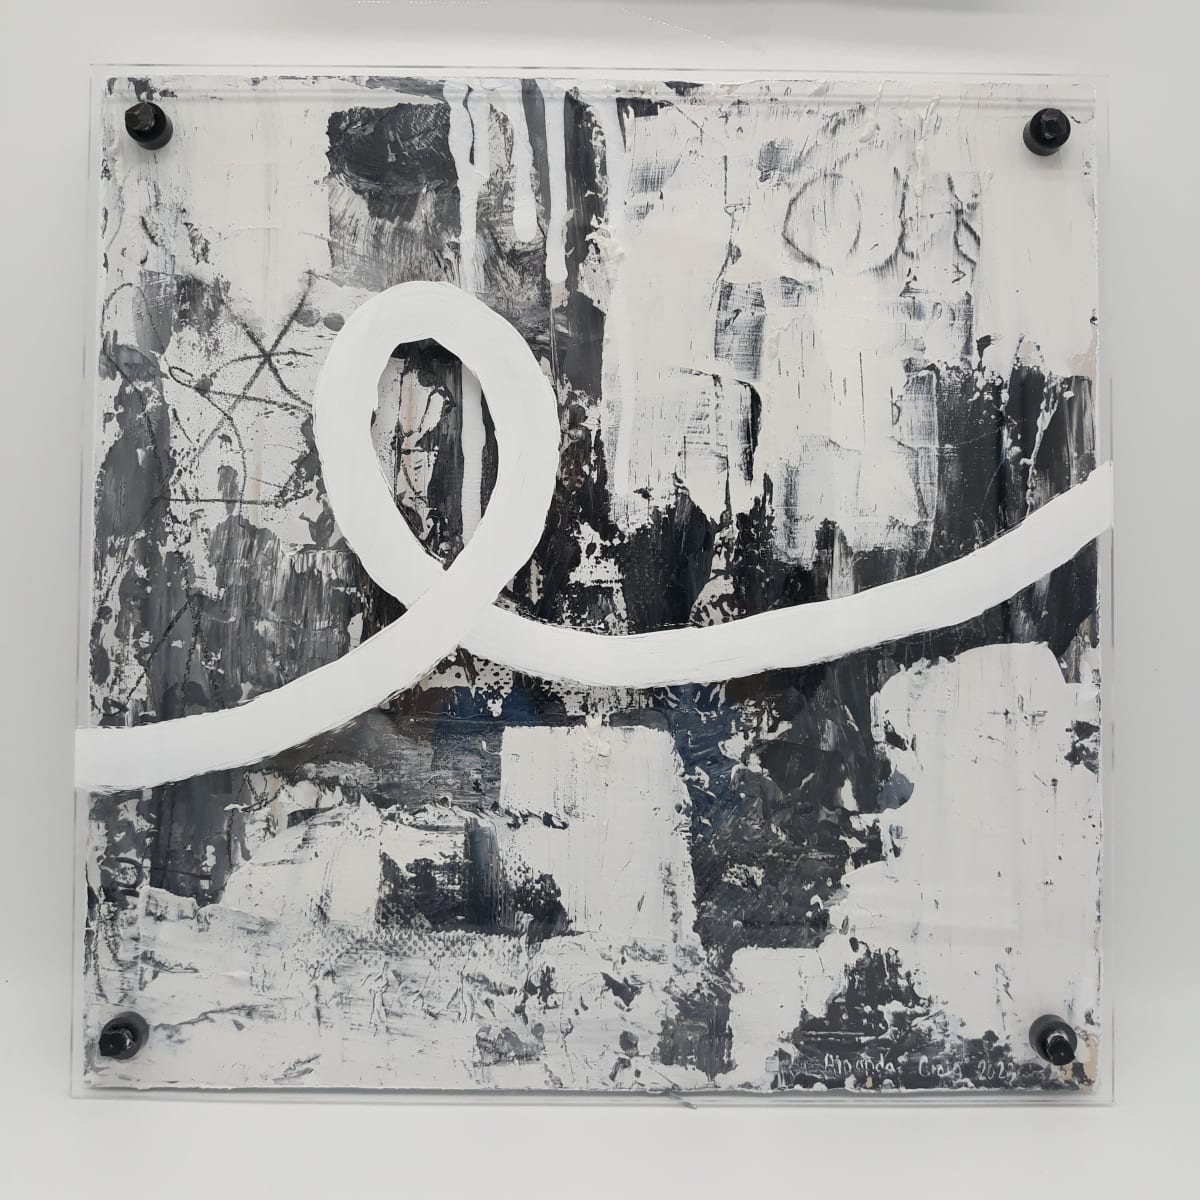 Joy by Amanda Craig  Image: Original mixed media on 12" x 12" birch panel with a plexi front (creating 3D image). Abstract in acrylic, ink, fabric, graphite, and plaster. Ready to hang; no frame required. Available as part of a triptych (See also: "Strength" and "Perseverance"). 